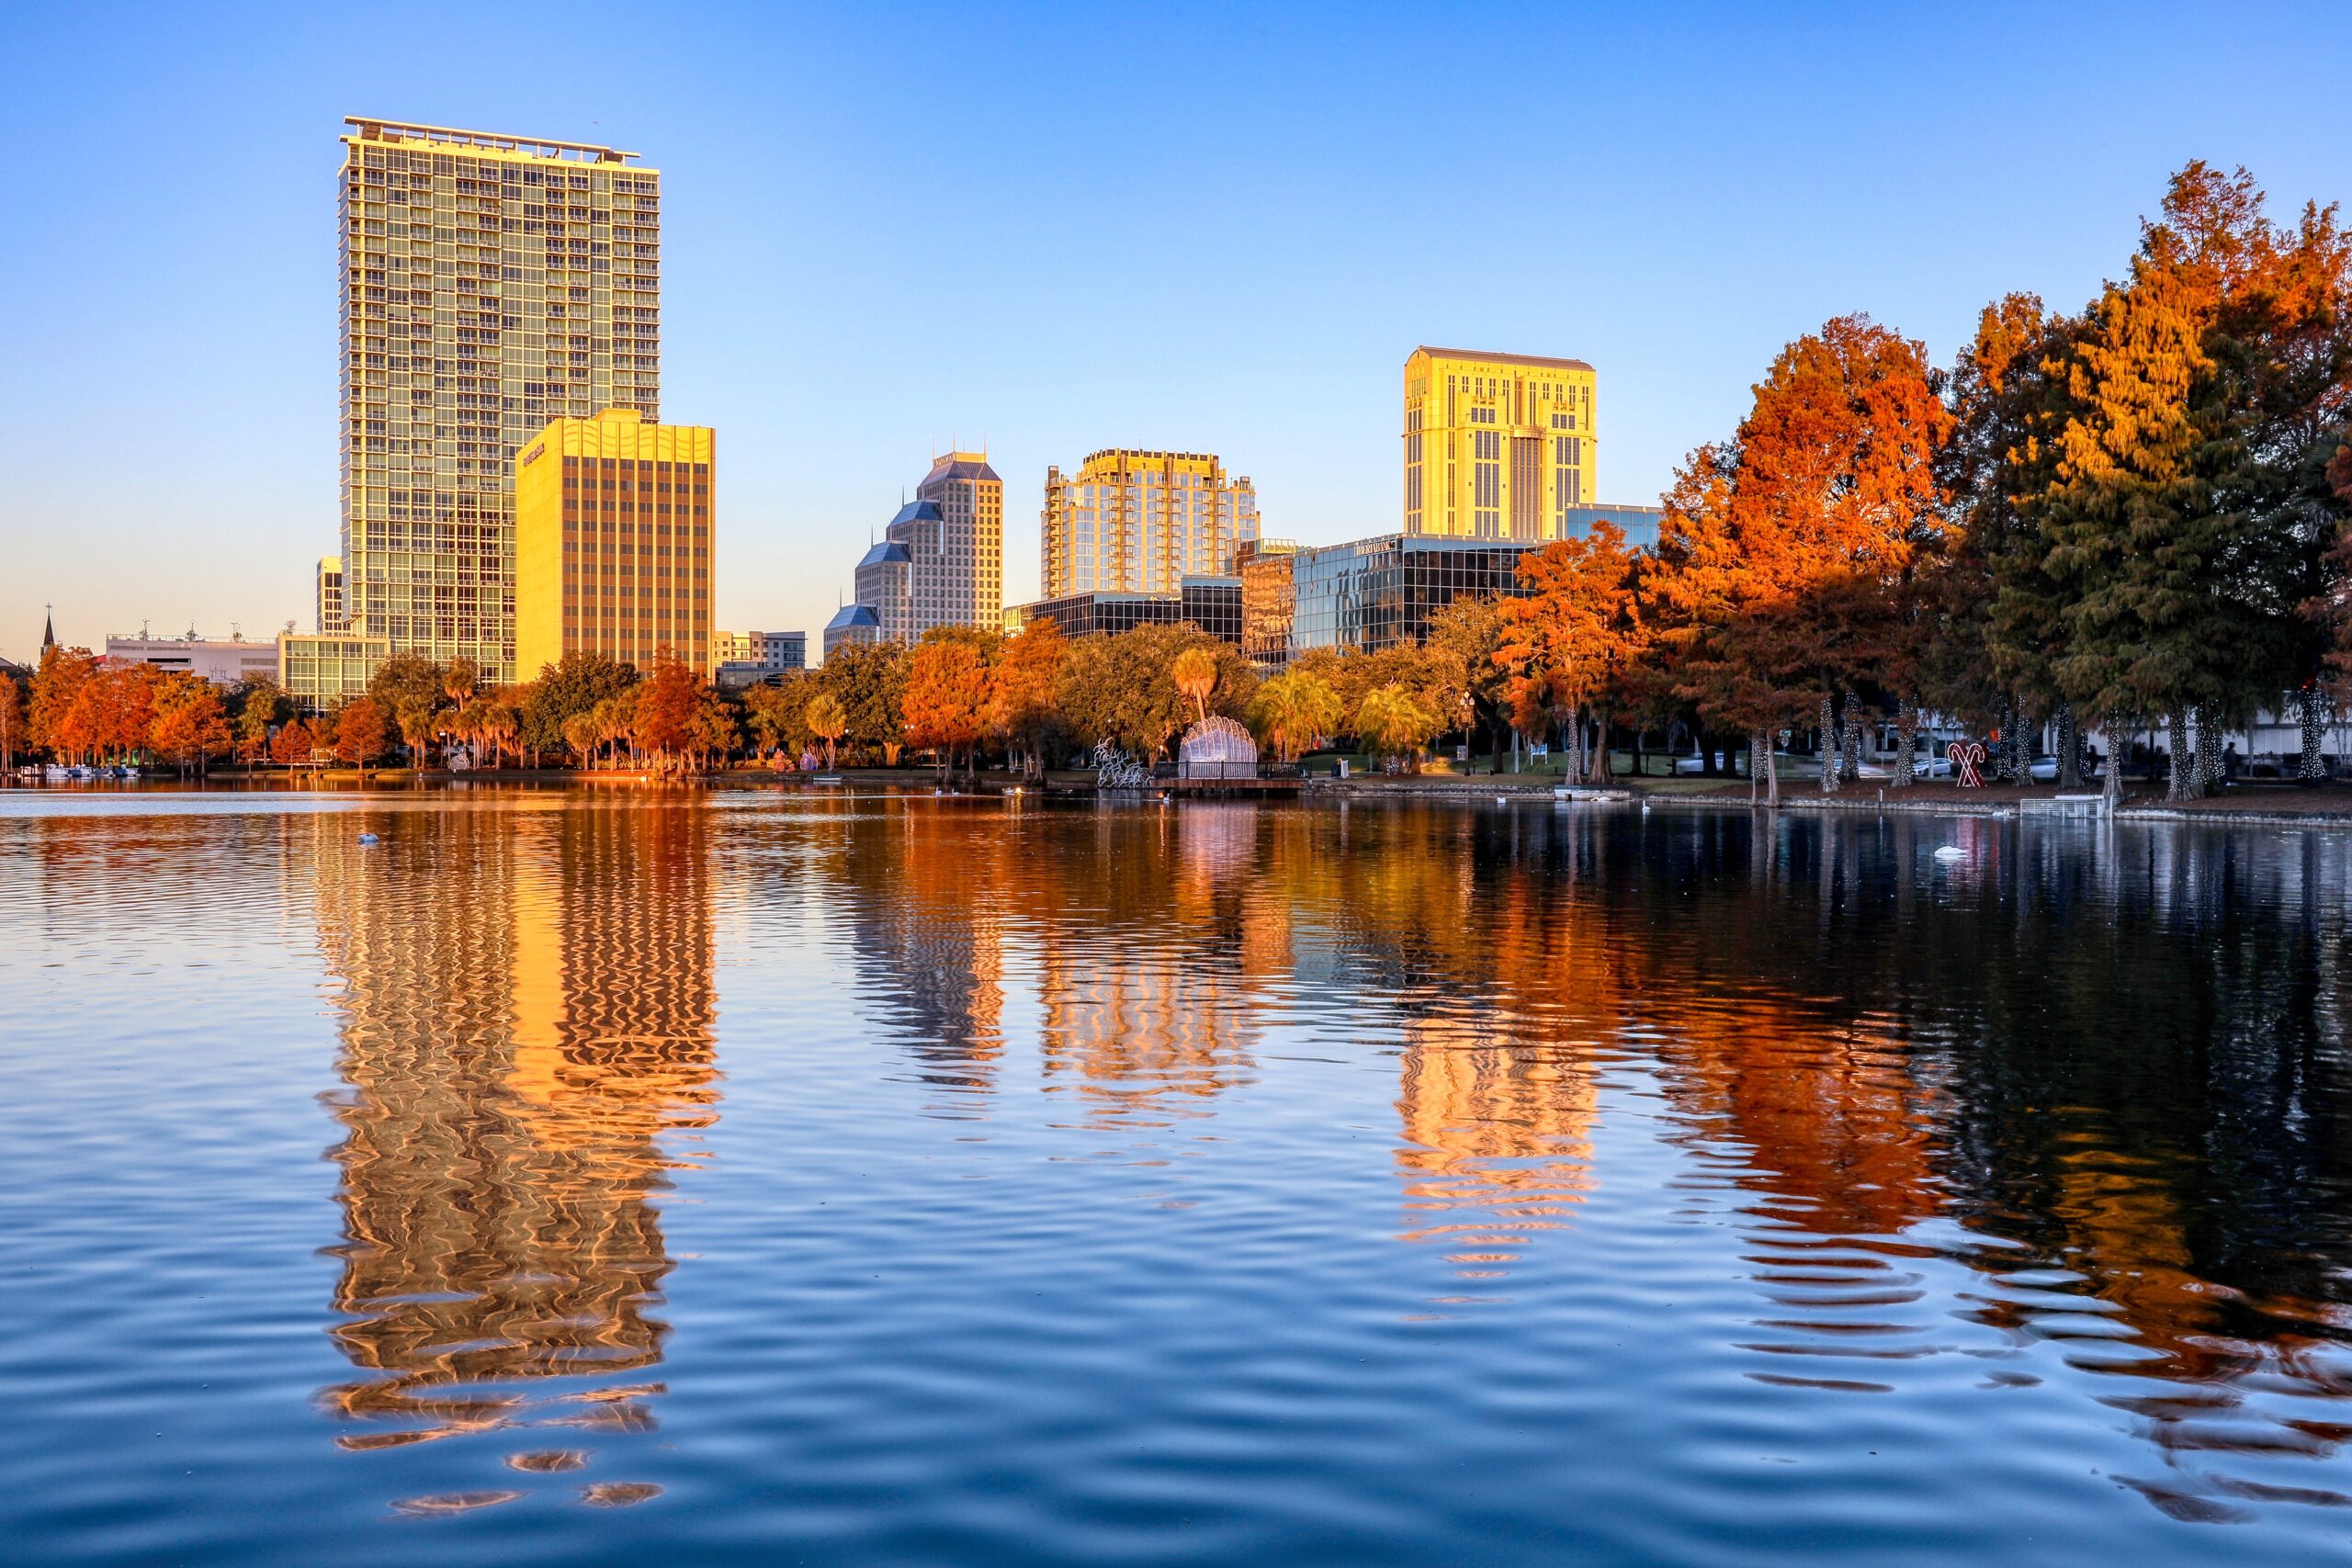 The sun rises over Lake Eola Park in Orlando, Florida. The still lake reflects trees and skyscrapers bathed in orange light